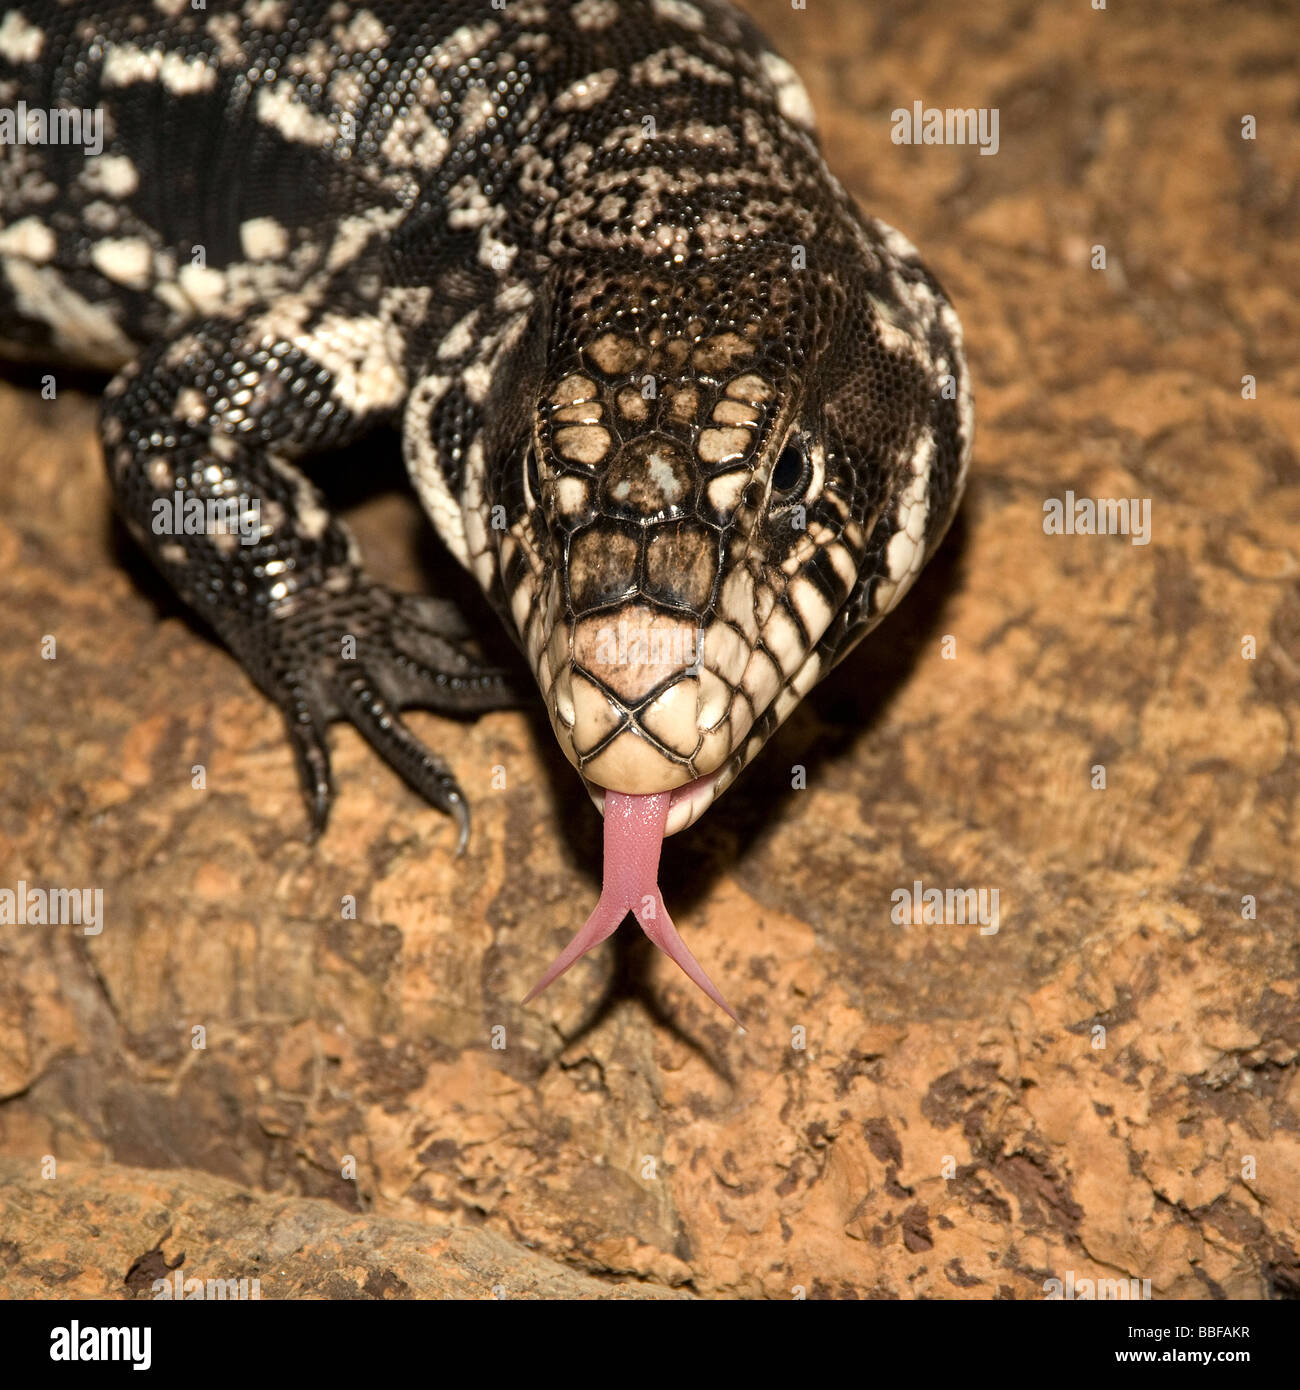 Colombian black and white tegu or common tegu with tongue out, a carnivorous lizard from South America Stock Photo